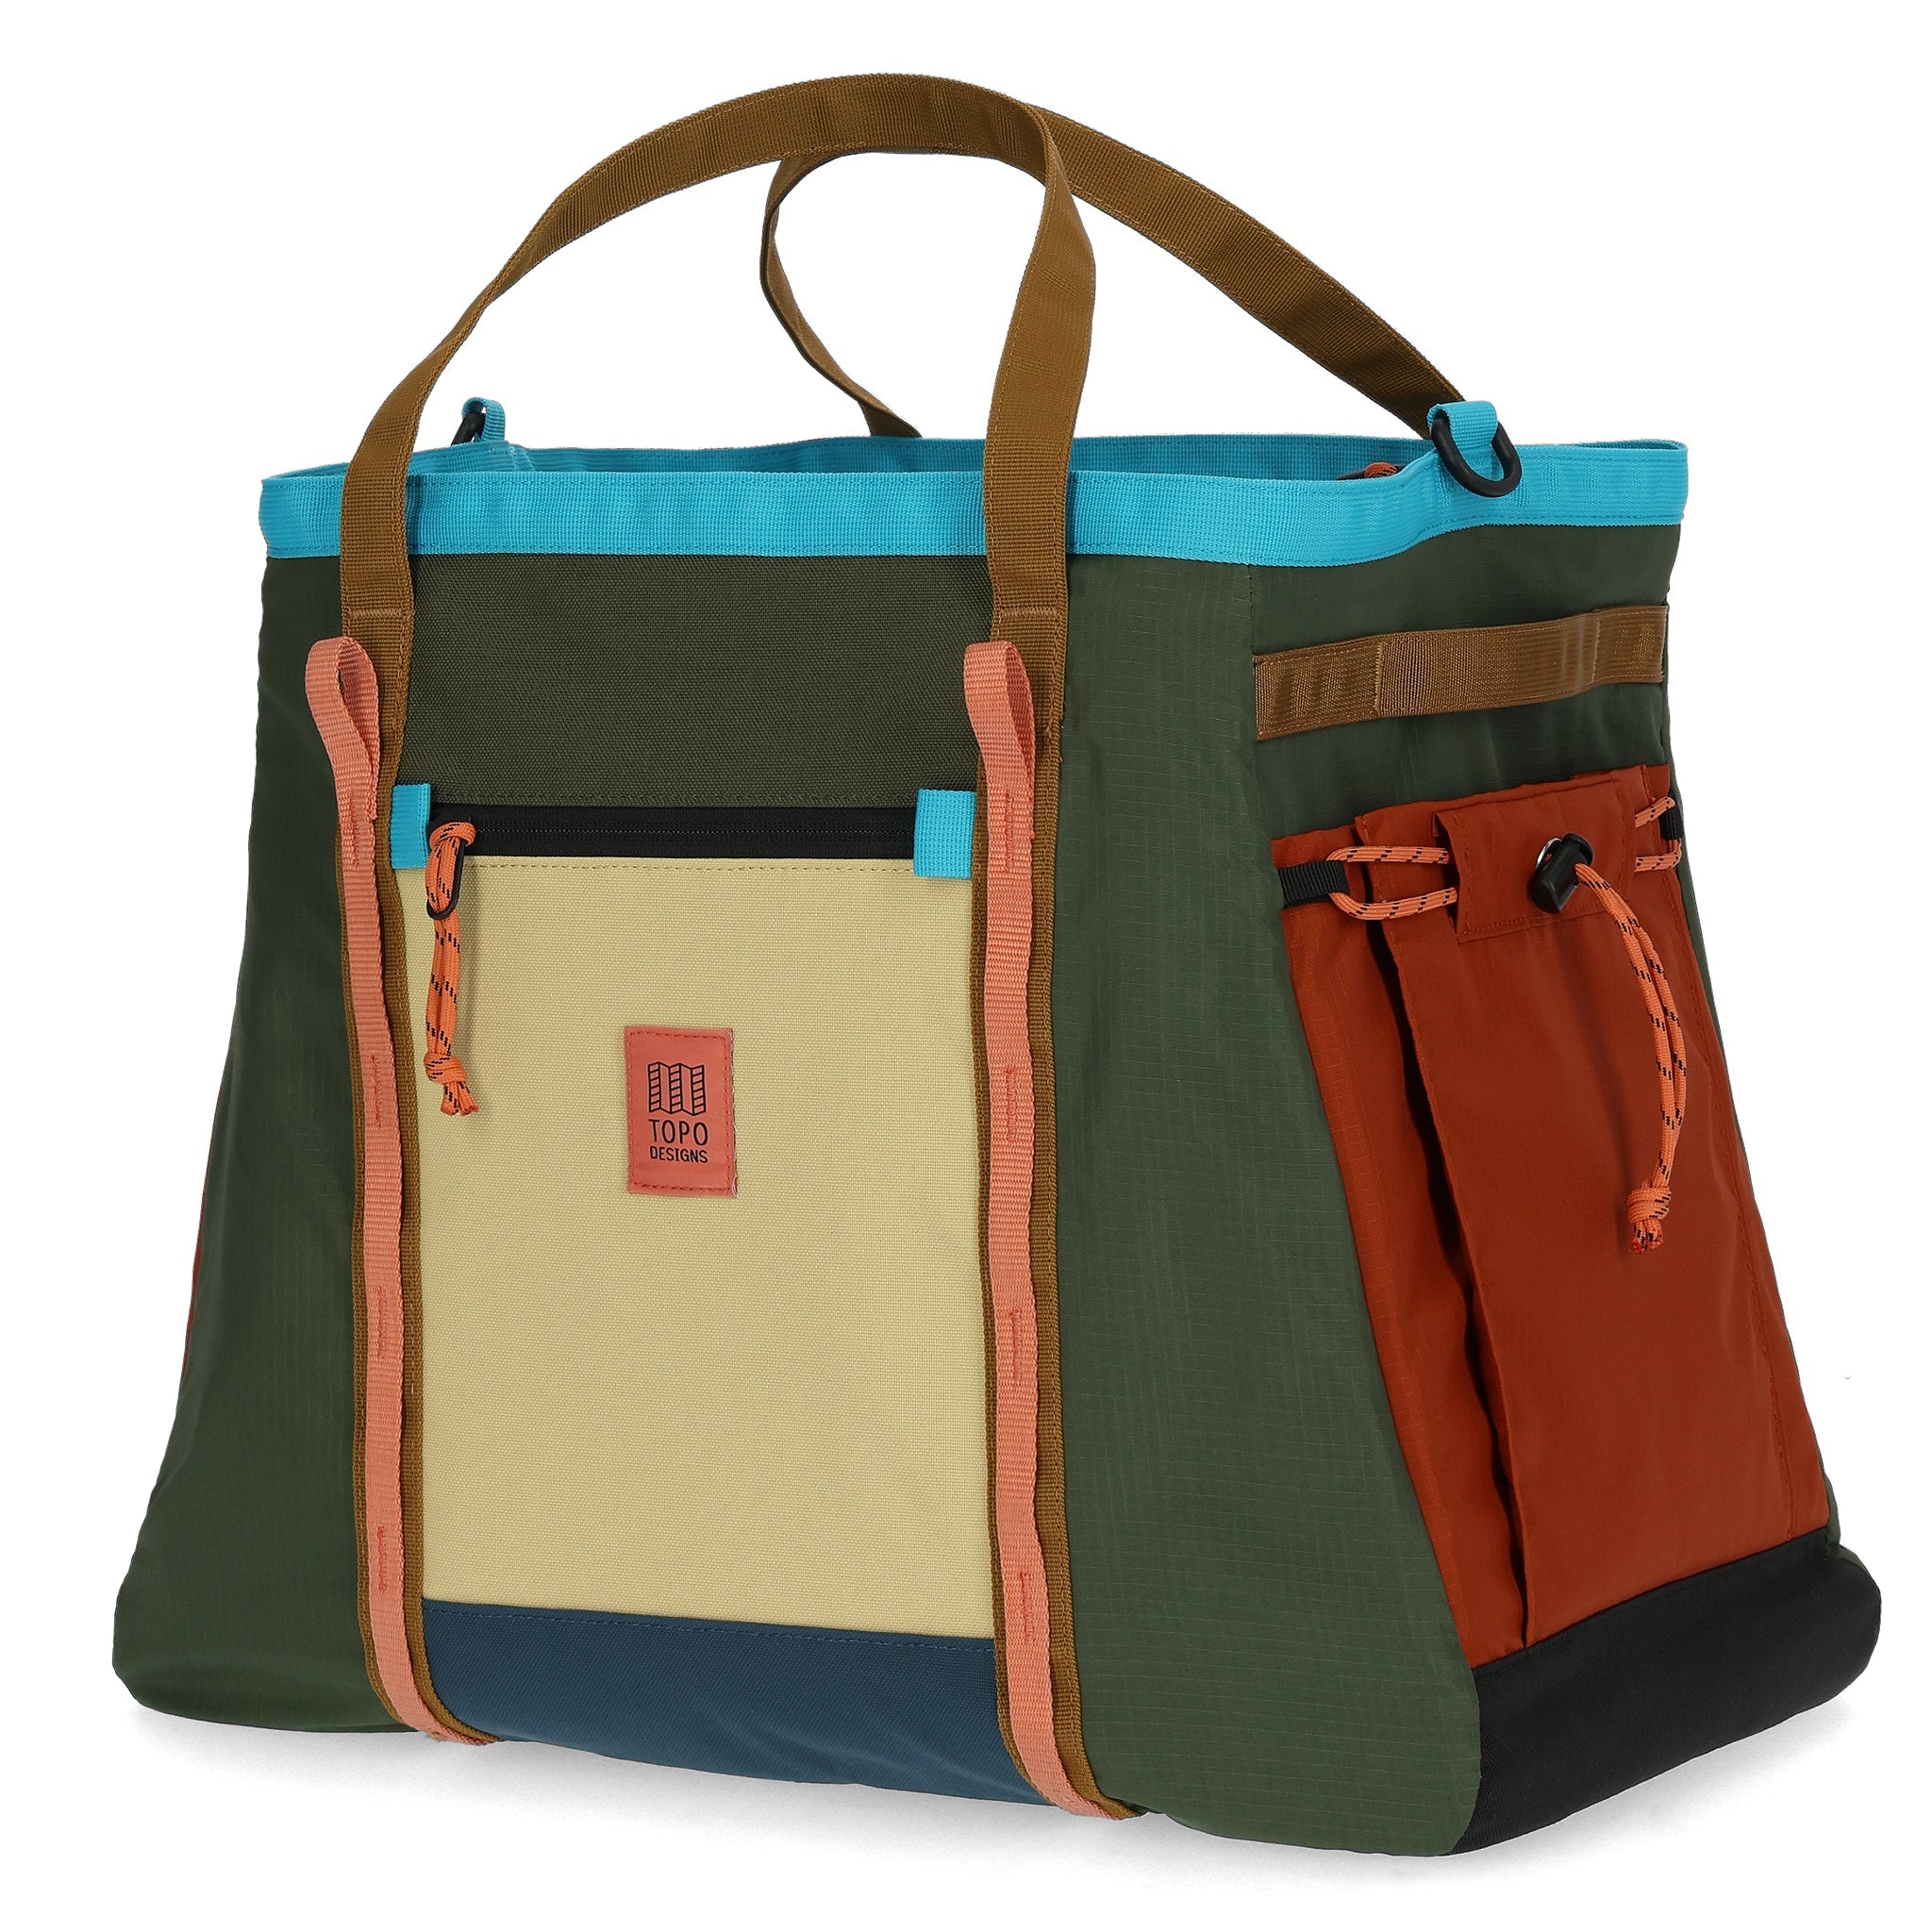 Front View of Topo Designs Mountain Gear Bag in "Olive / Hemp"